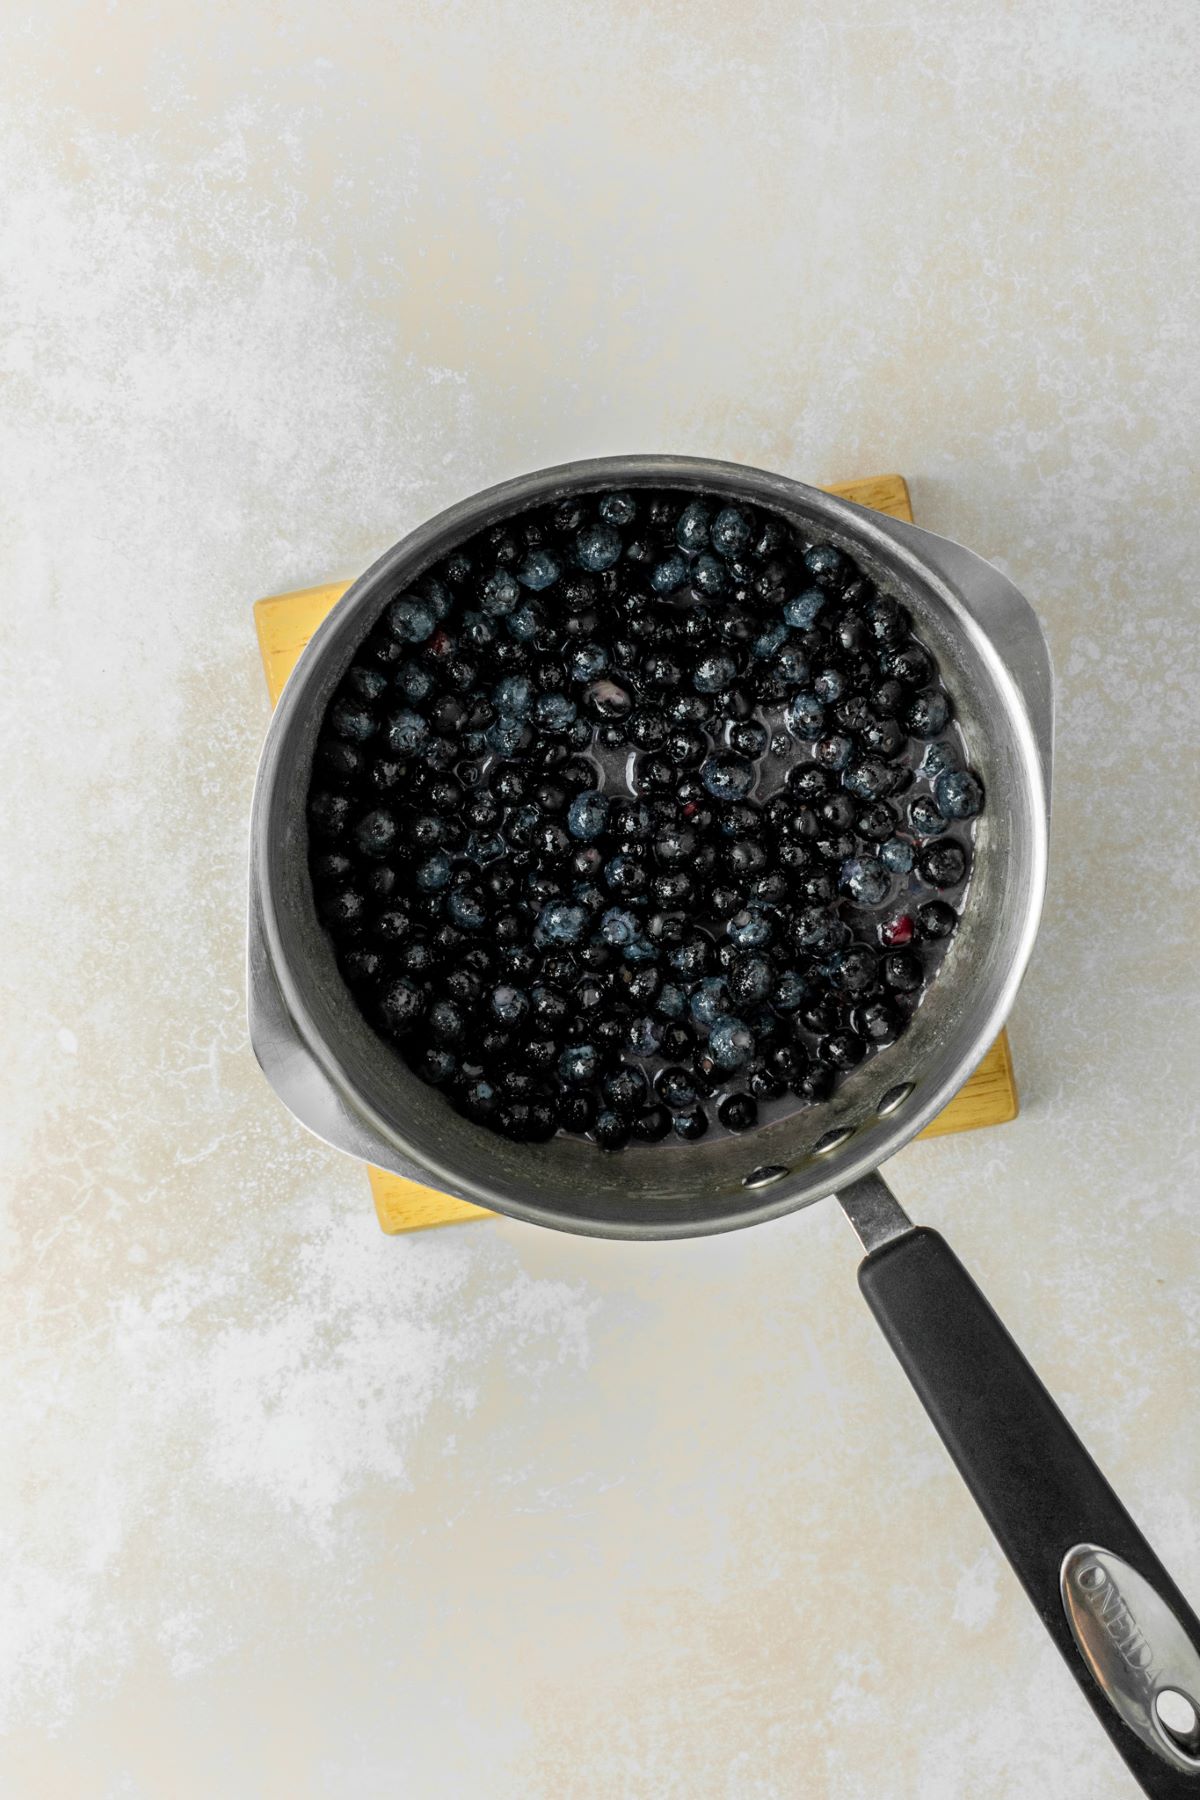 Blueberry filling cooking in a medium saucepan.